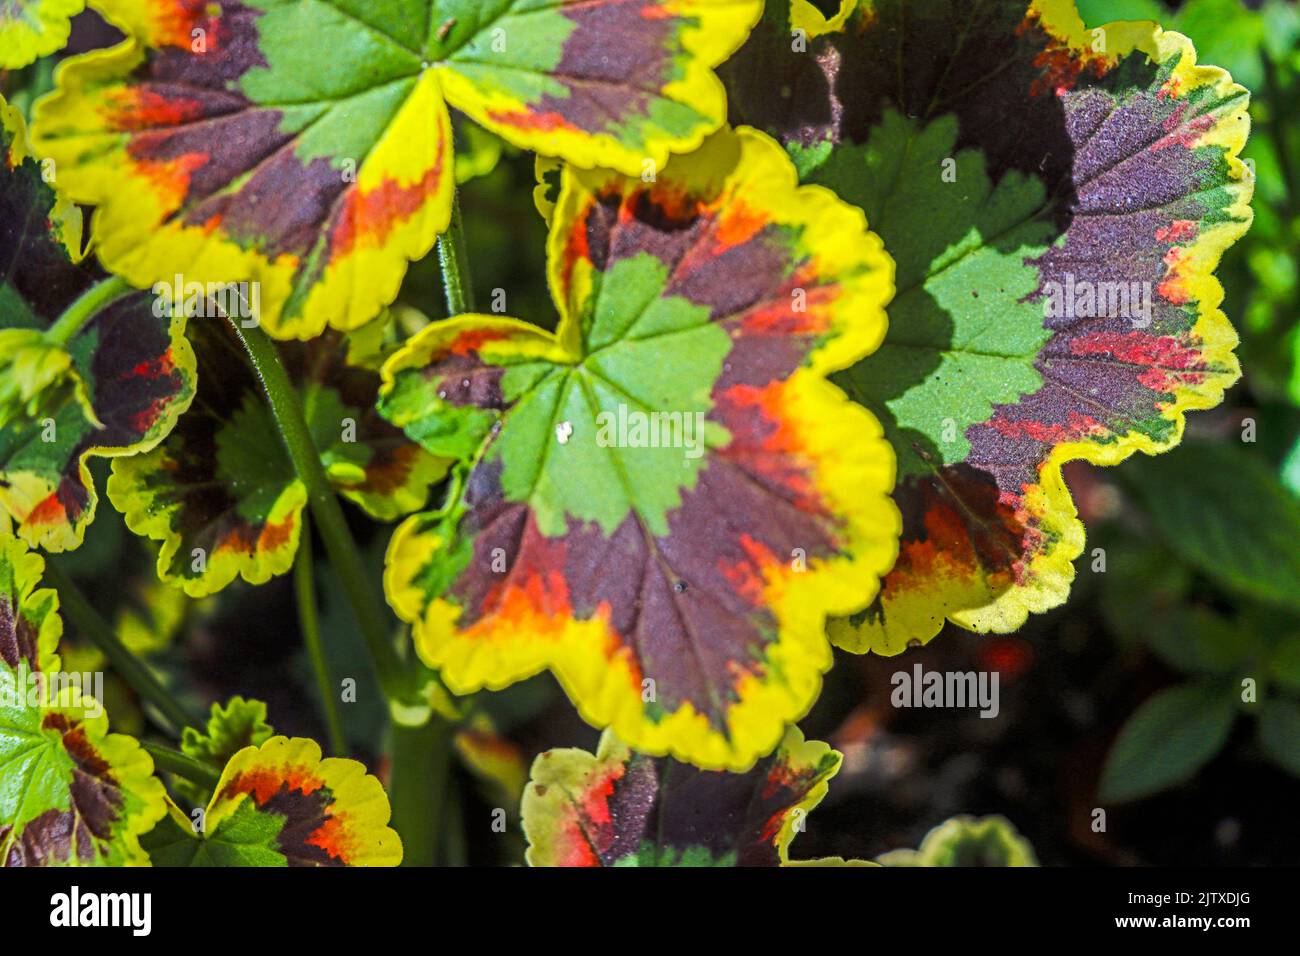 Pelargonium leaves (Geraniaceae). Similar to but not the same as geraniums. Butchart Gardens located in Brentwood Bay, British Columbia, Canada. Stock Photo